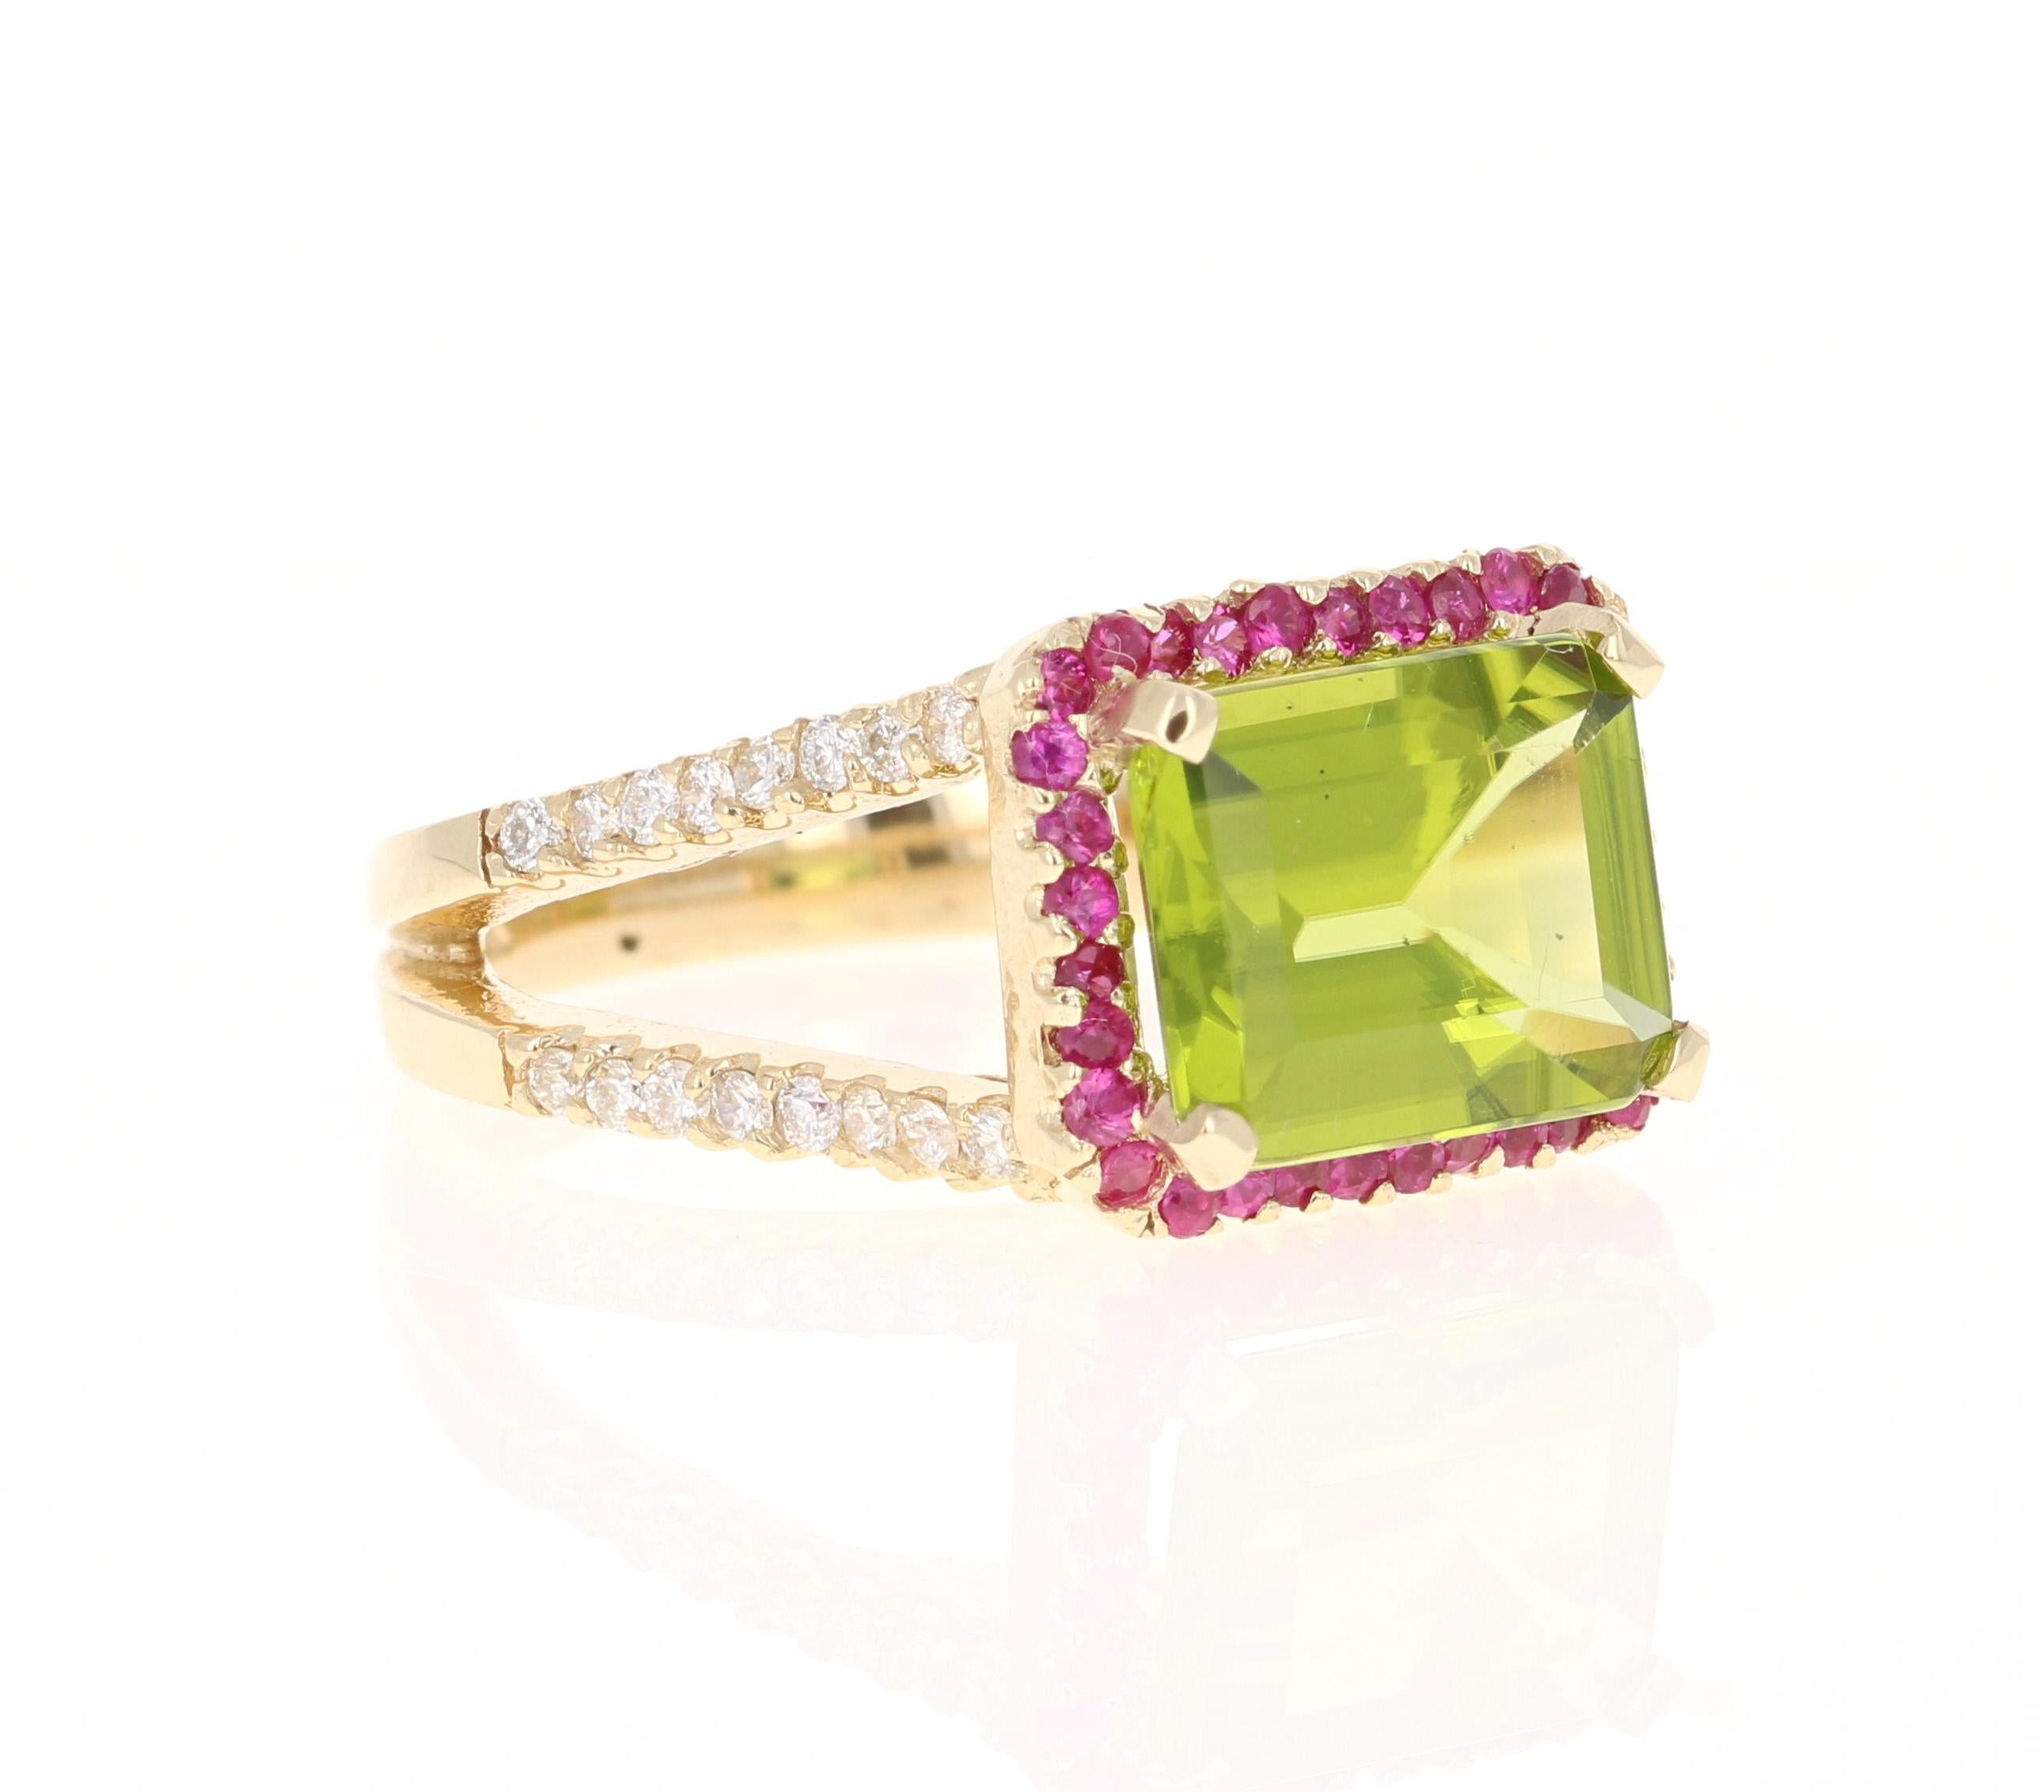 This beautiful ring has an Emerald Cut Peridot that weighs 4.10 Carats. The ring is surrounded by 32 Pink Sapphires that weigh 0.46 Carats and 42 Round Cut Diamonds that weigh 0.47 Carats. (Clarity: SI, Color: F)  The total carat weight of this ring